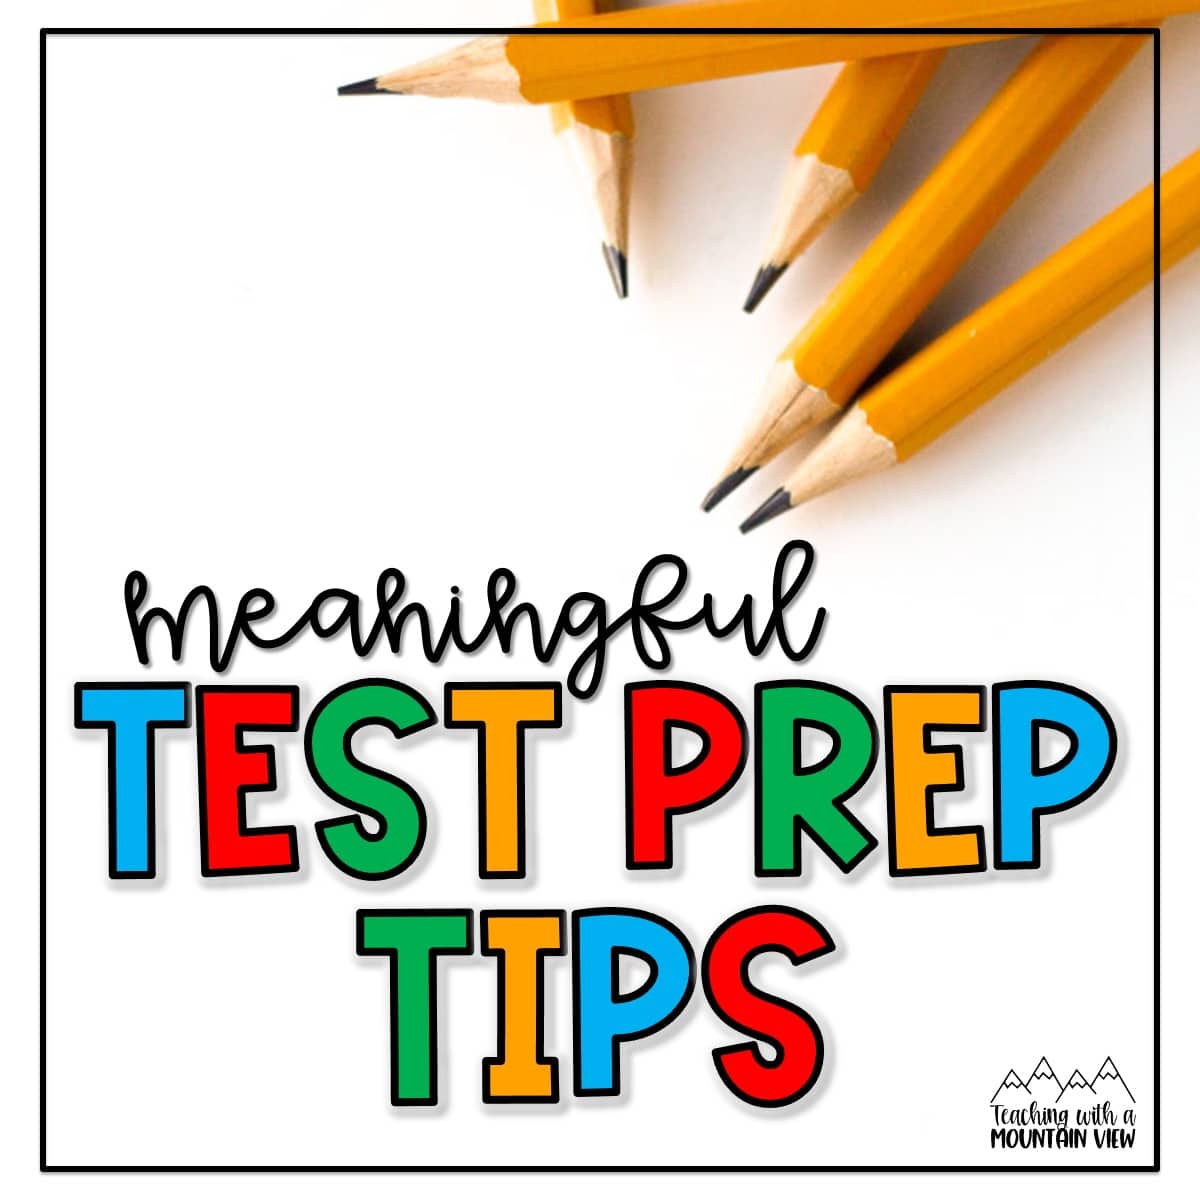 Practical test prep tips for how to make test prep meaningful and effective for upper elementary students.